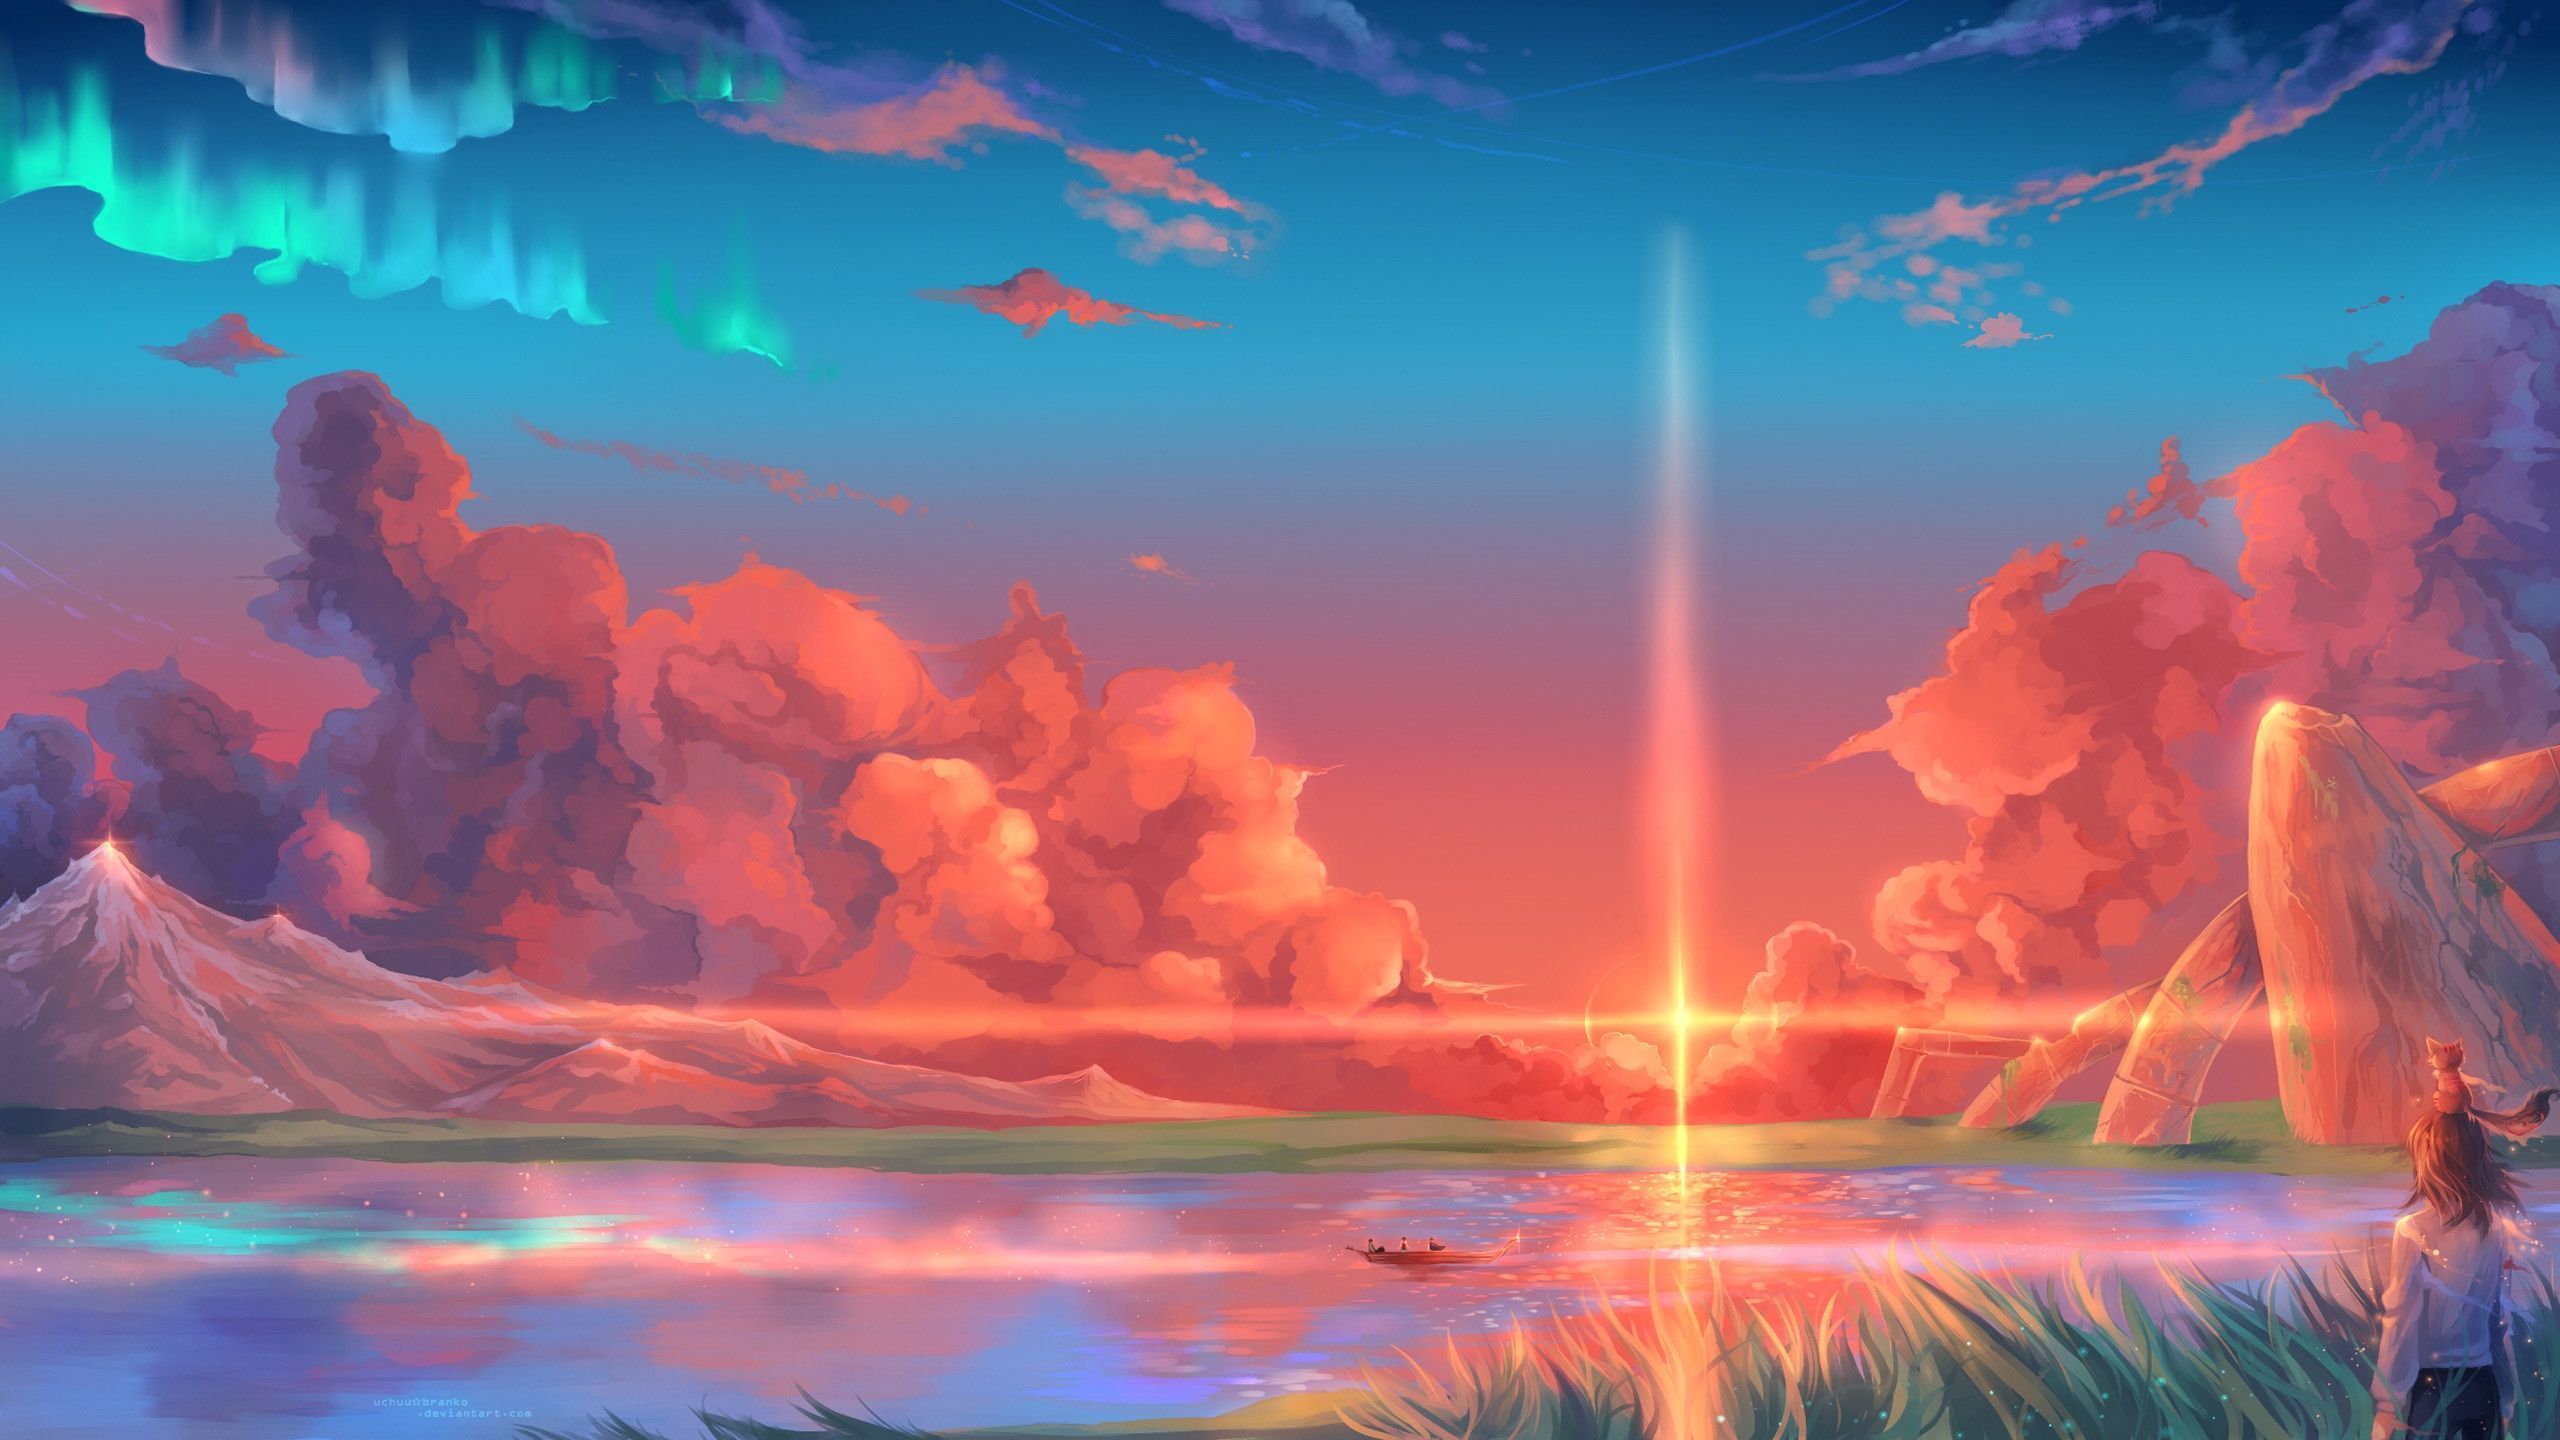 Beautiful Anime Scenery Wallpaper #Music #IndieArtist #Chicago